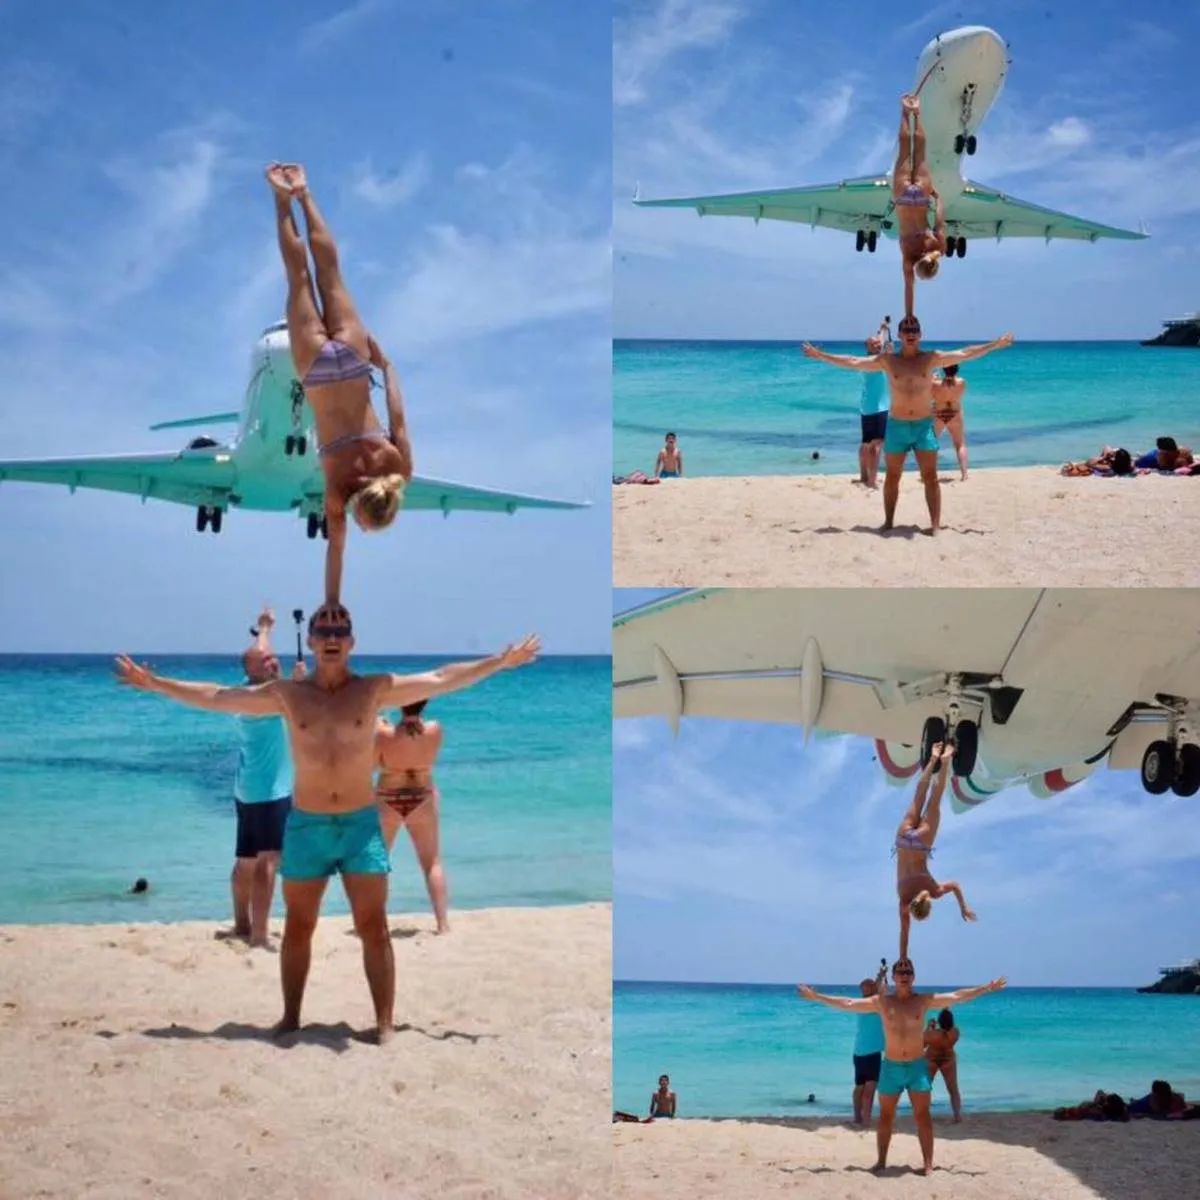 couple performing stunt on beach, almost get hit by low floying plane